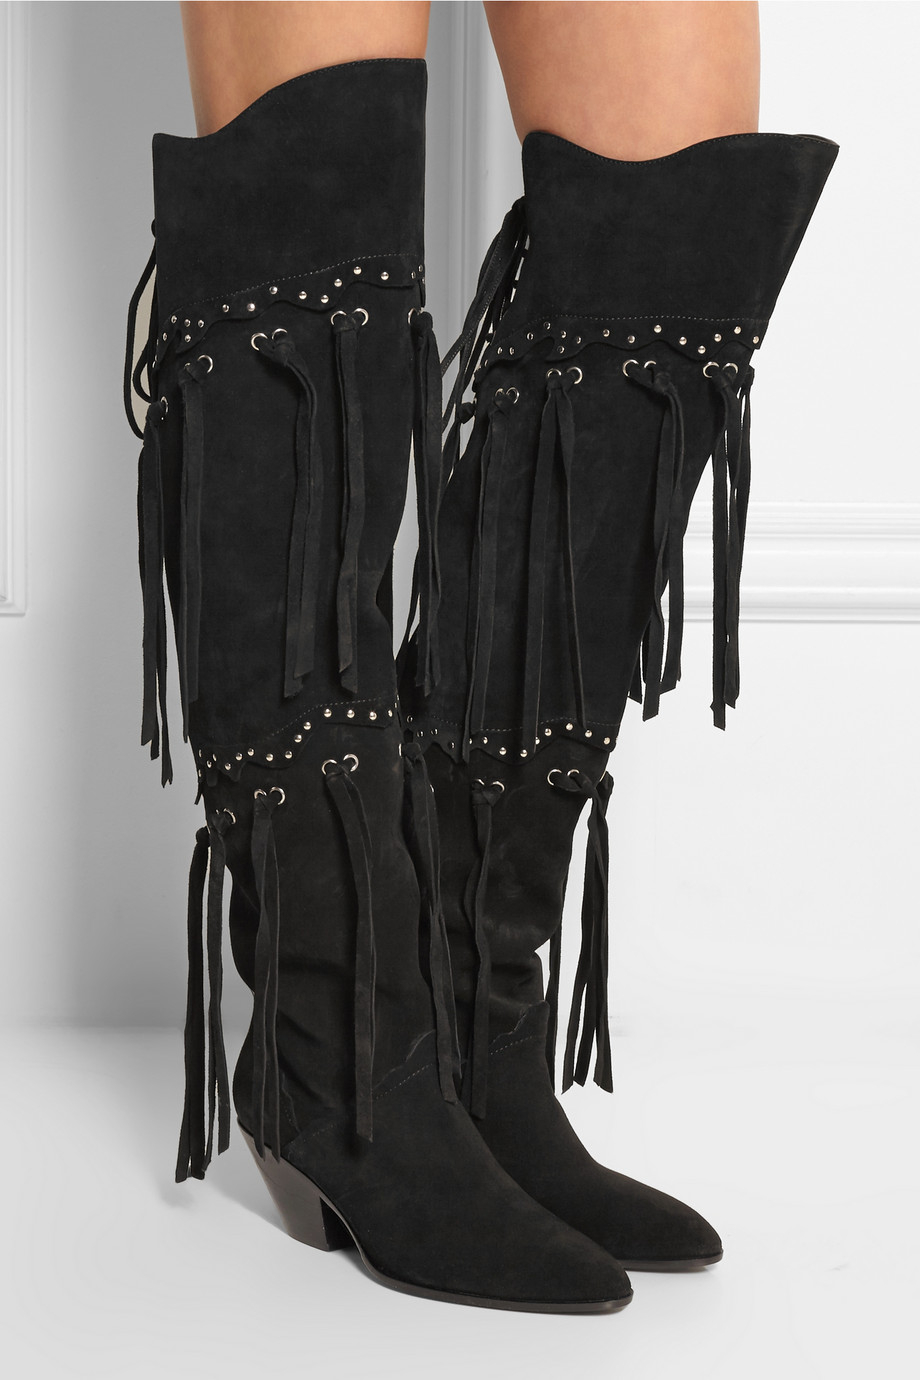 Giuseppe zanotti Studded And Fringed Suede Over-the-knee Boots in ...